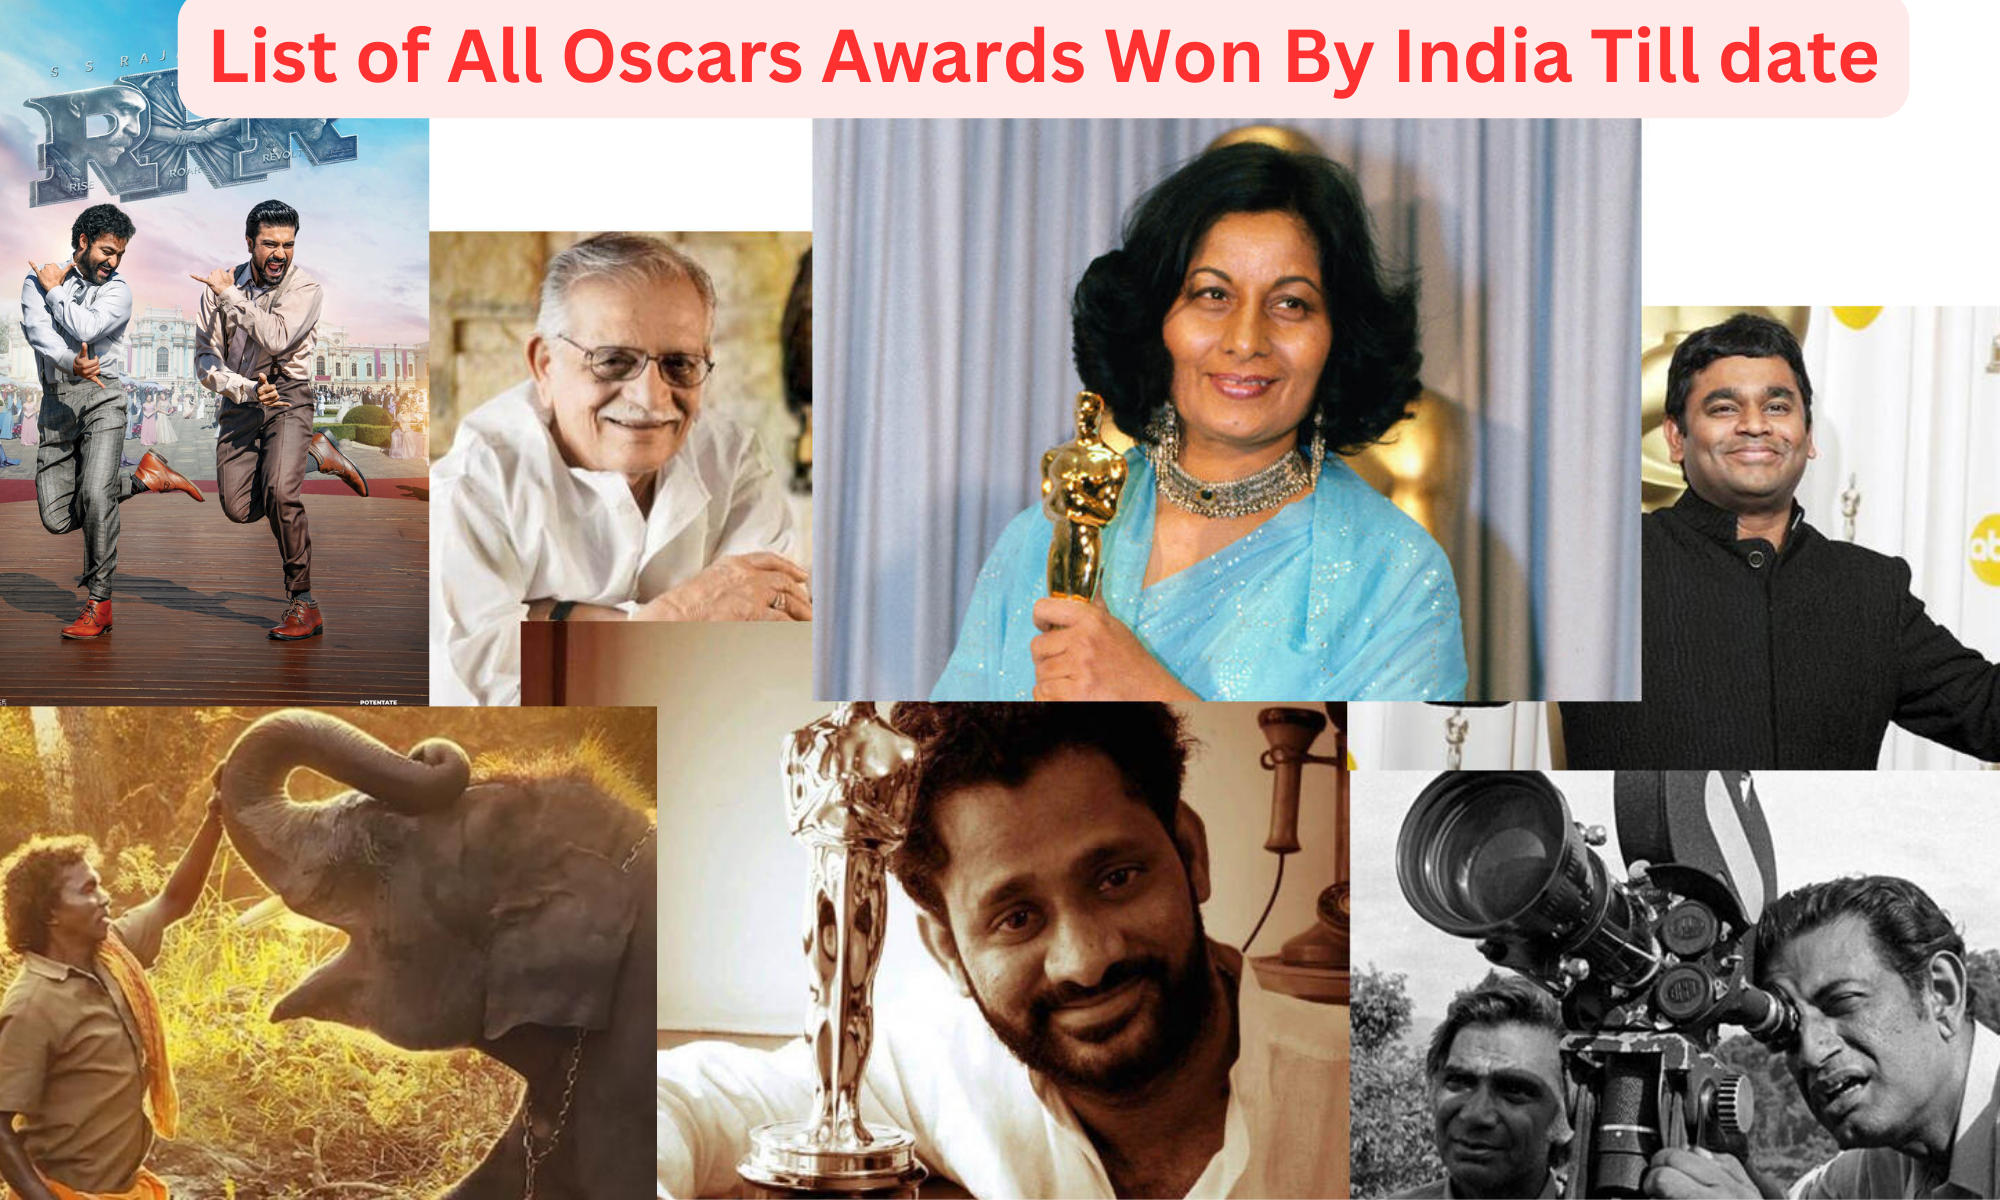 List of All Oscars Awards Won By India Till date